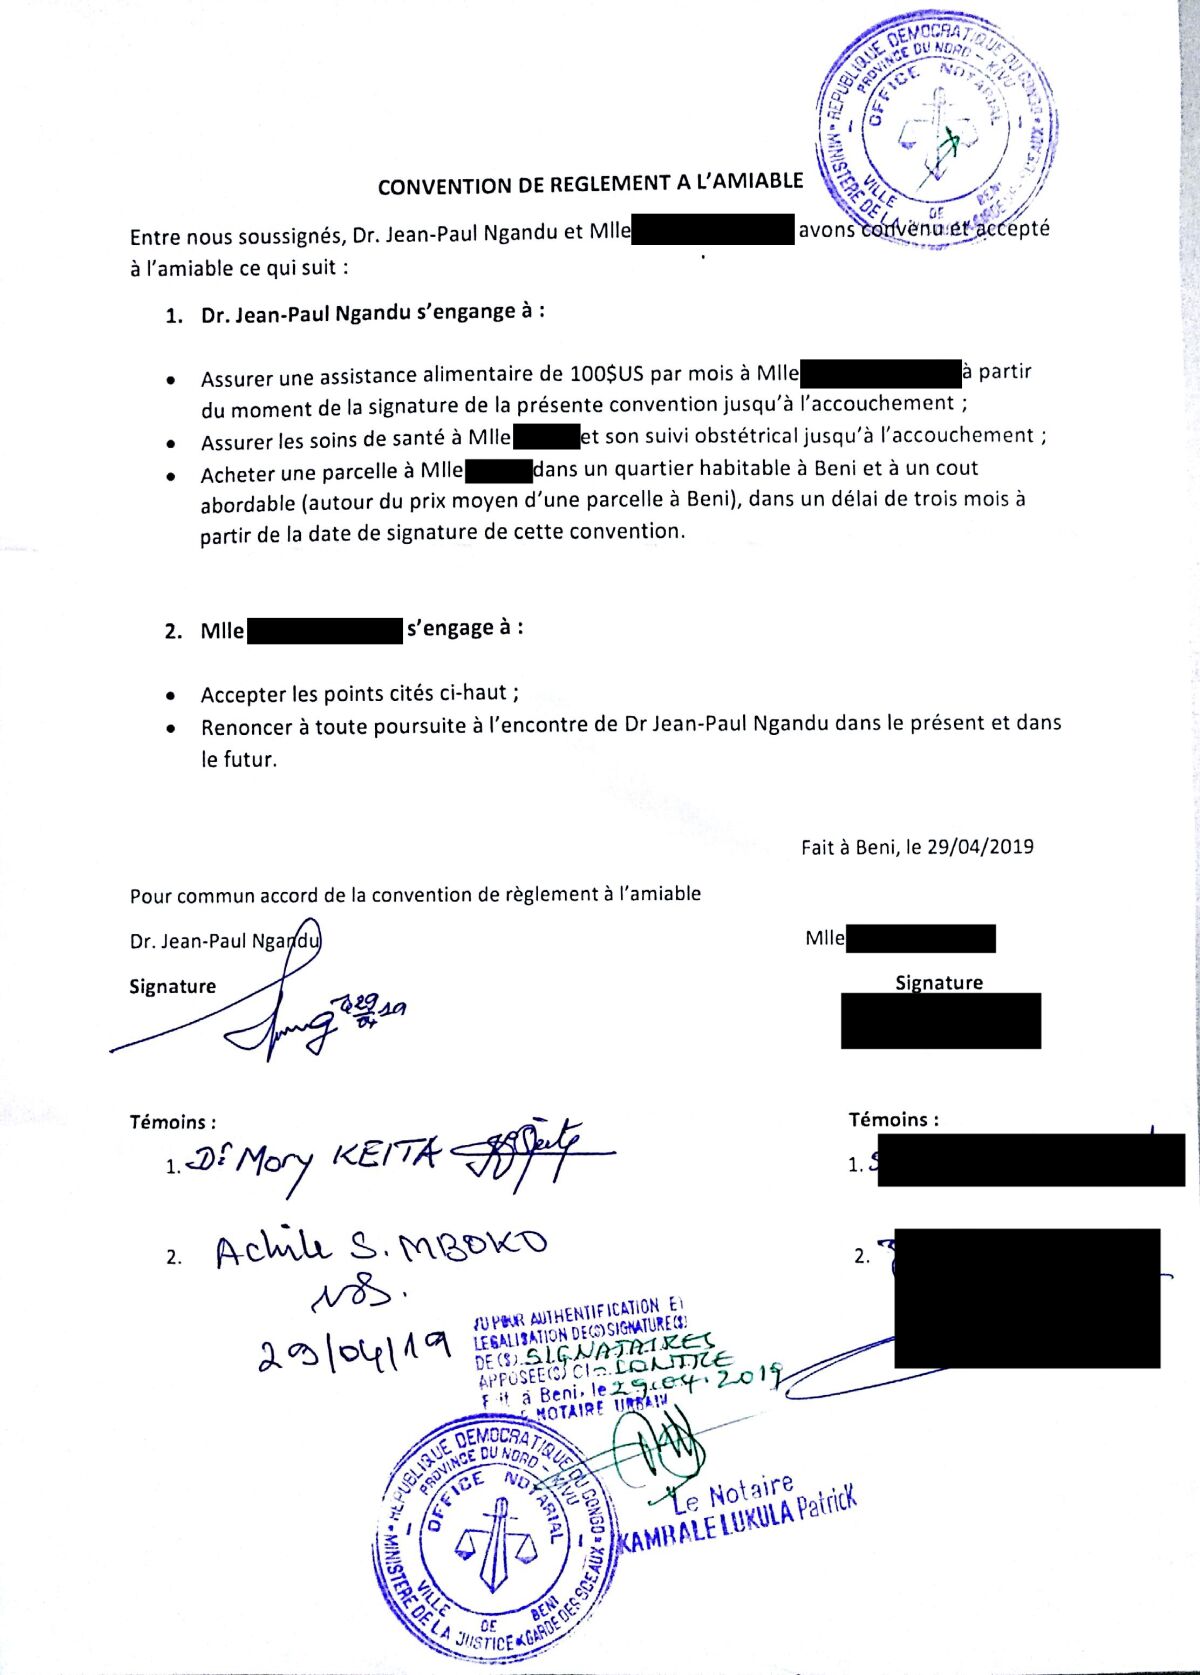 FILE - This image provided by Dr. Jean-Paul Ngandu shows an April 29, 2019 contract between him and a Congolese woman he allegedly impregnated. The notarized document contains the signatures of two World Health Organization staff members, including a manager, as witnesses to the agreement. Ngandu promised to pay her a monthly stipend, cover the woman's pregnancy-related health costs and to buy her a plot of land. A confidential U.N. report into the alleged missteps by senior World Health Organization staffers in how they handled a sexual misconduct case during an Ebola outbreak in Congo found their response didn't violate the agency’s policies because of what some officials described as a “loophole.” The report was submitted to WHO last month and wasn't released publicly. (Courtesy Dr. Jean-Paul Ngandu via AP, File)